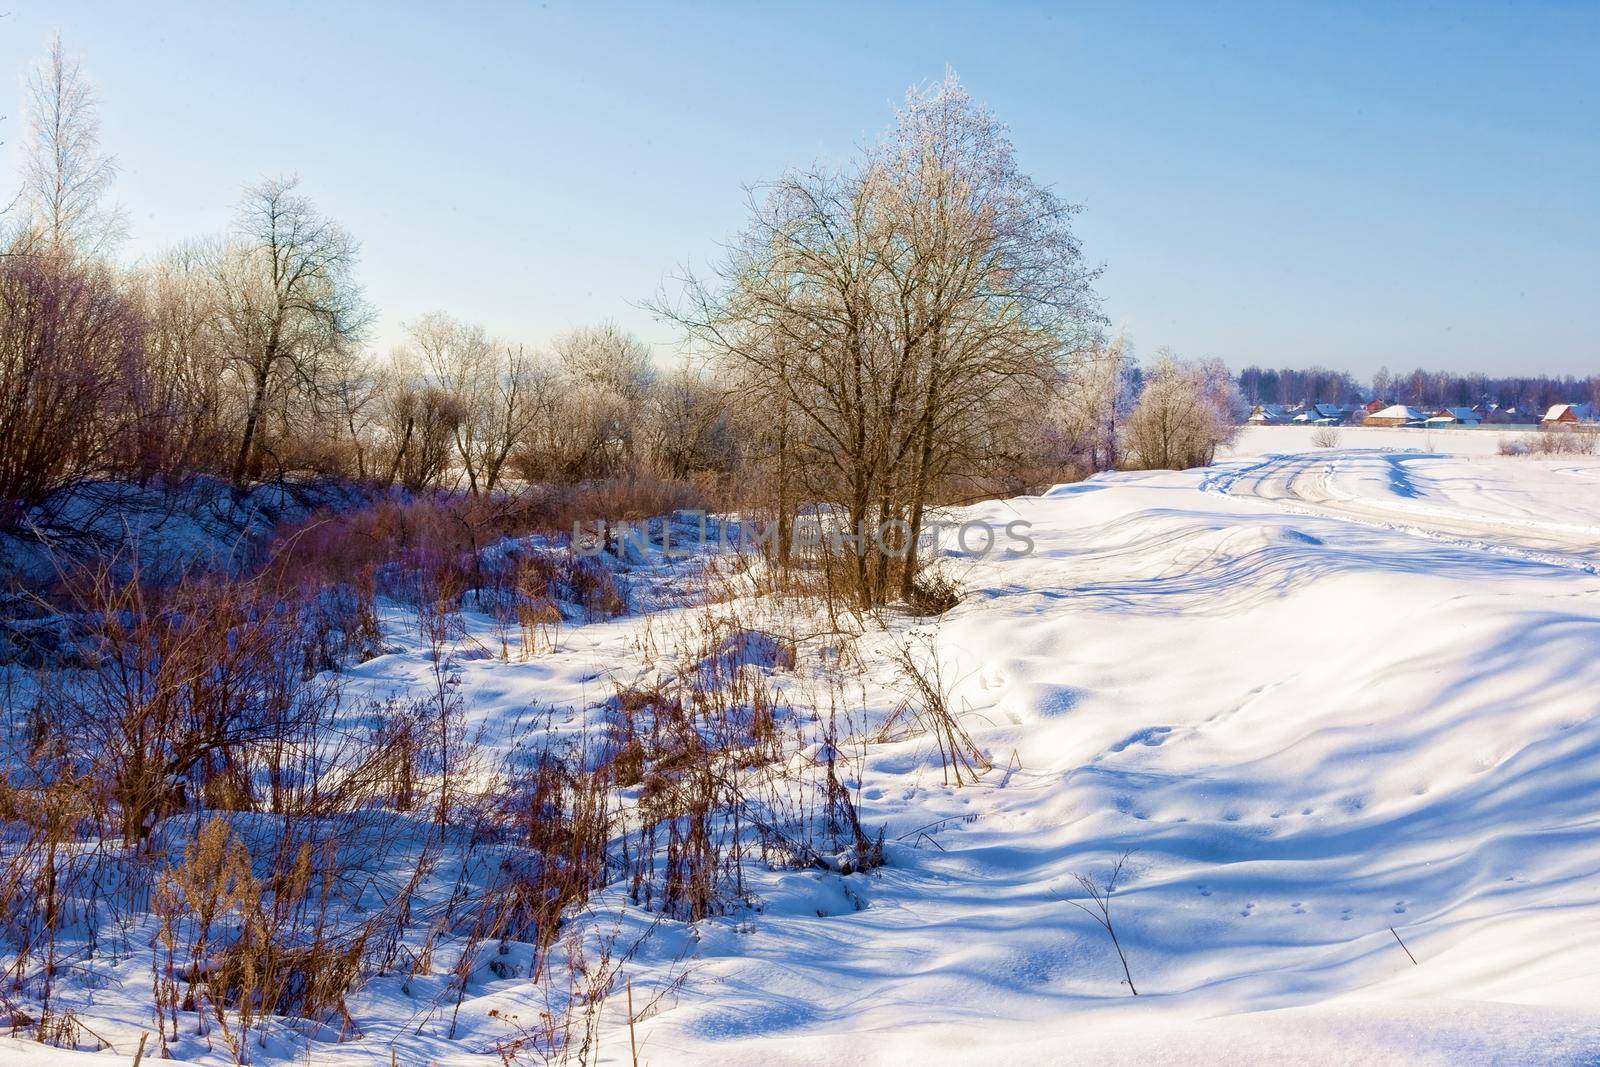 Beautiful winter landscape in Russia, Moscow region. The concept of Christmas, winter outdoor recreation.